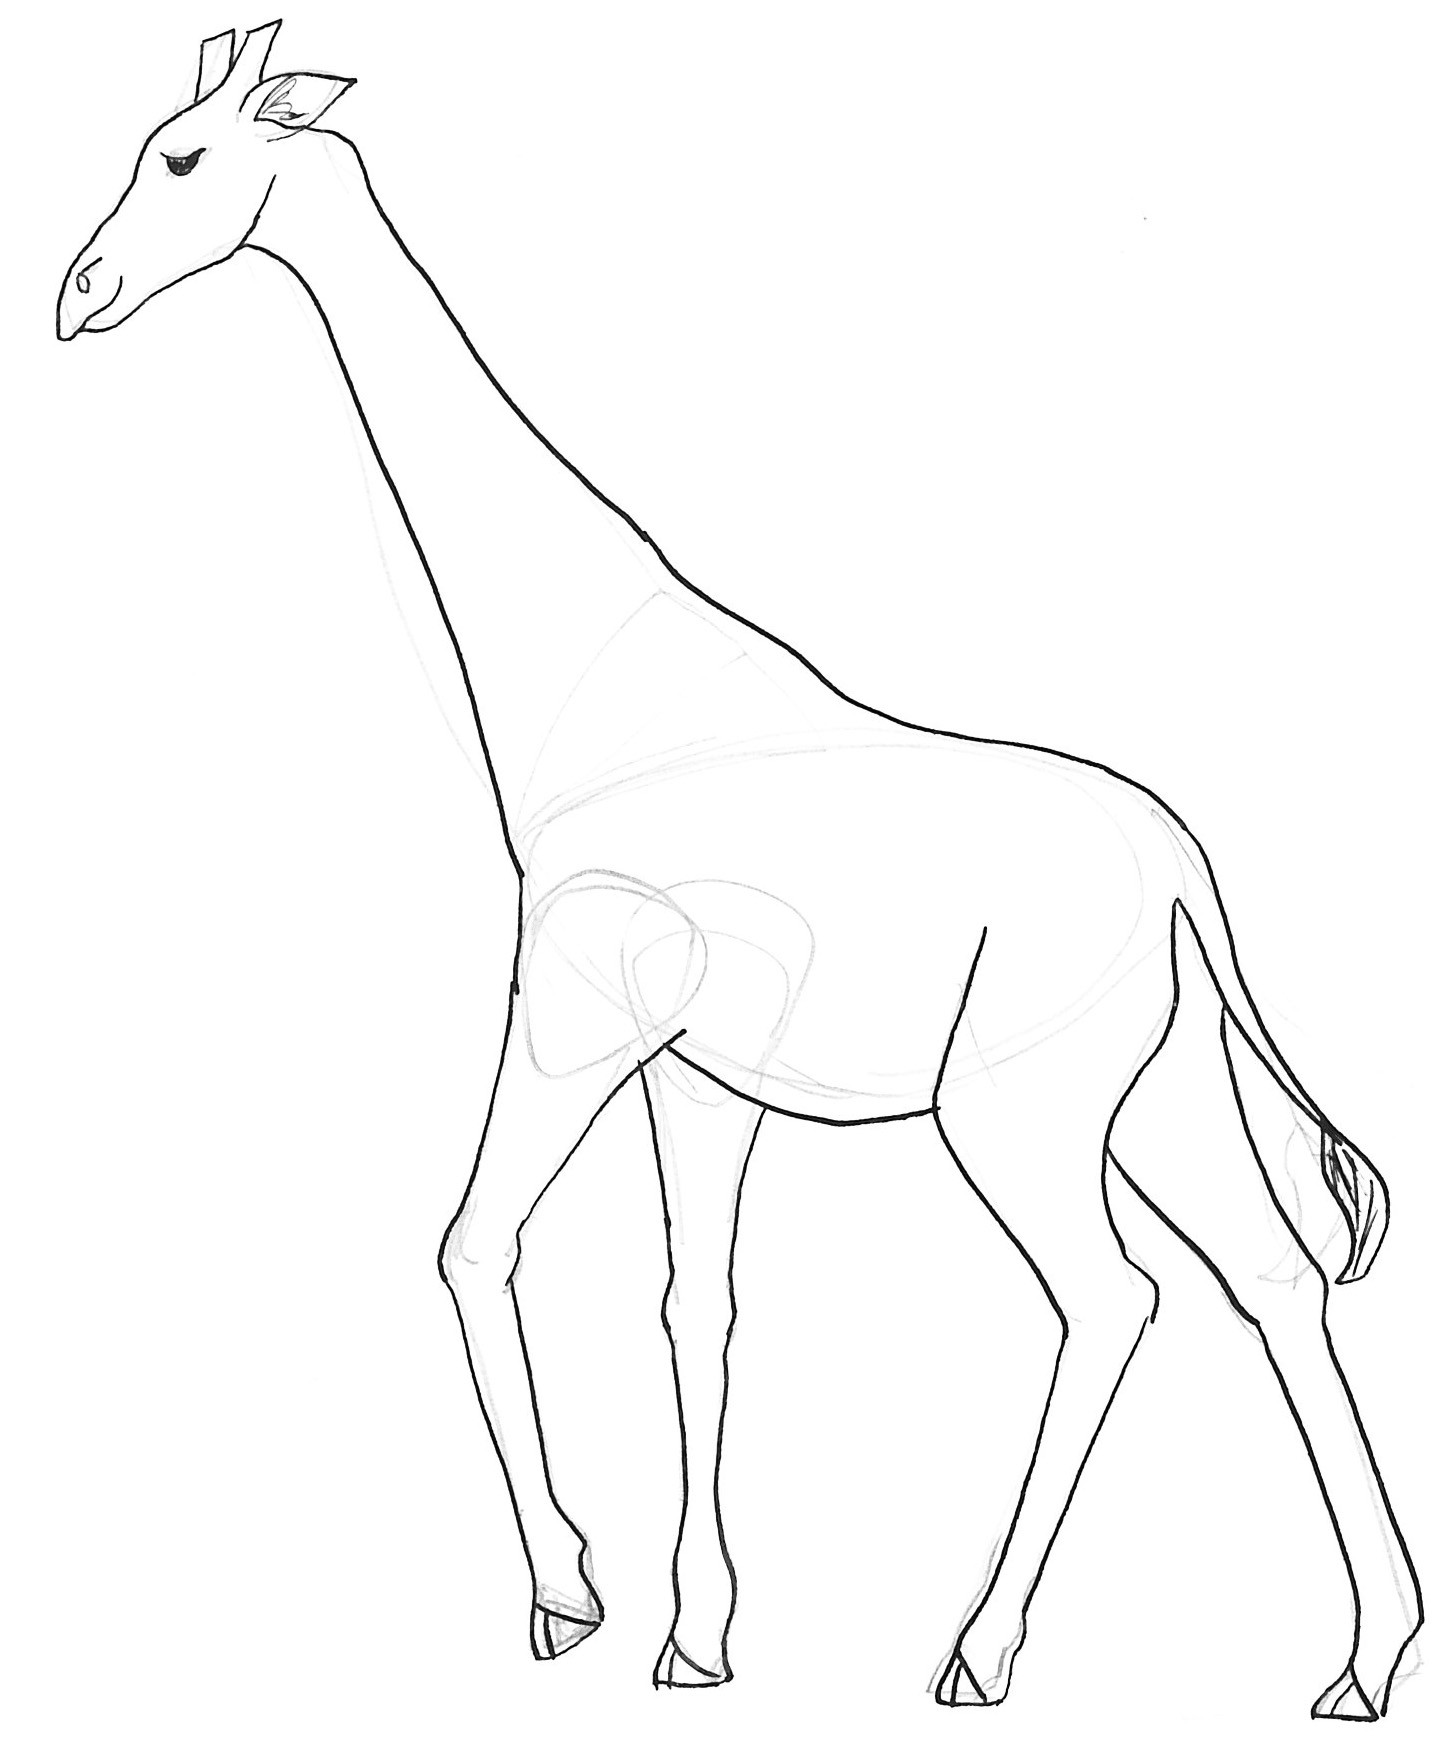 Coloring Pages For Teens Of Zebra And Giraffe Together
 giraffe